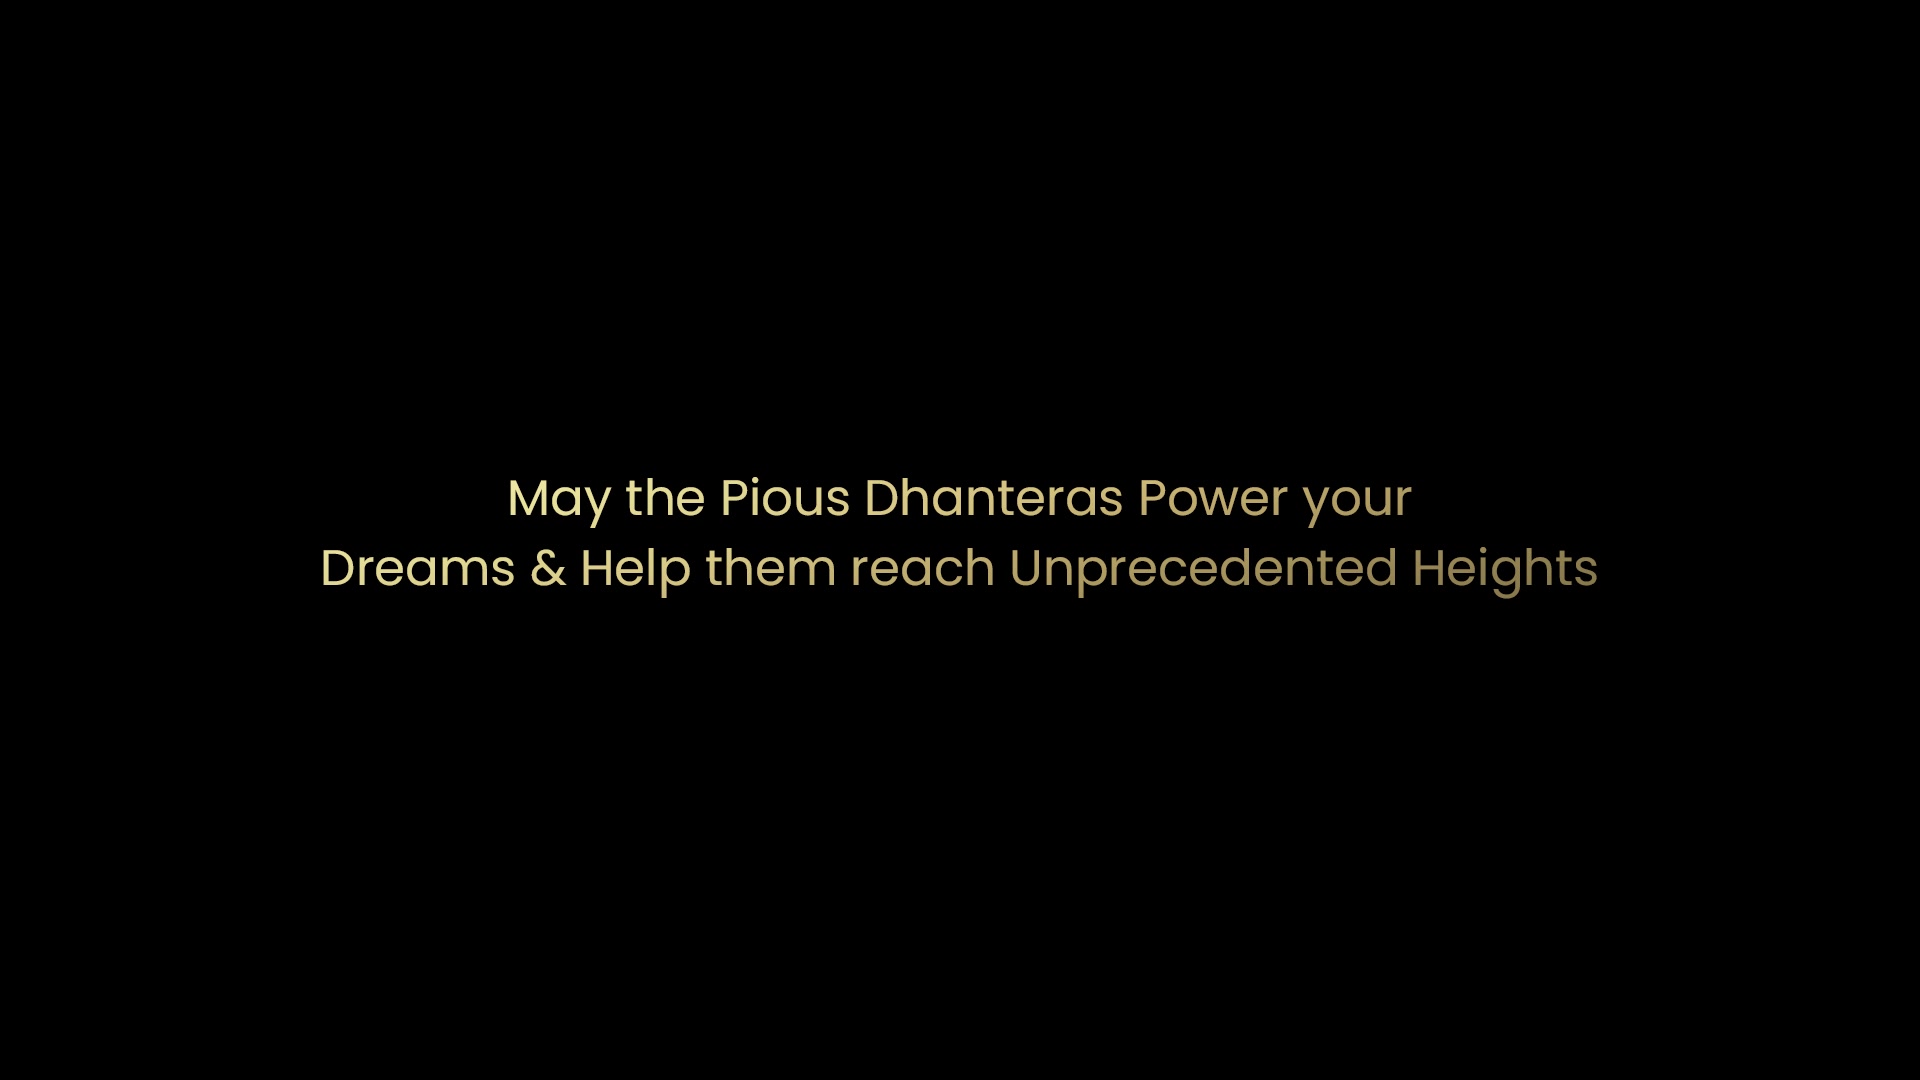 May the Pious Dhanteras Power your Dreams & Help them reach Unprecedented Heights!

#HappyDhanteras #Dhanteras #IndianFestival #Festival #business #technology #innovations #india #CompuBrain